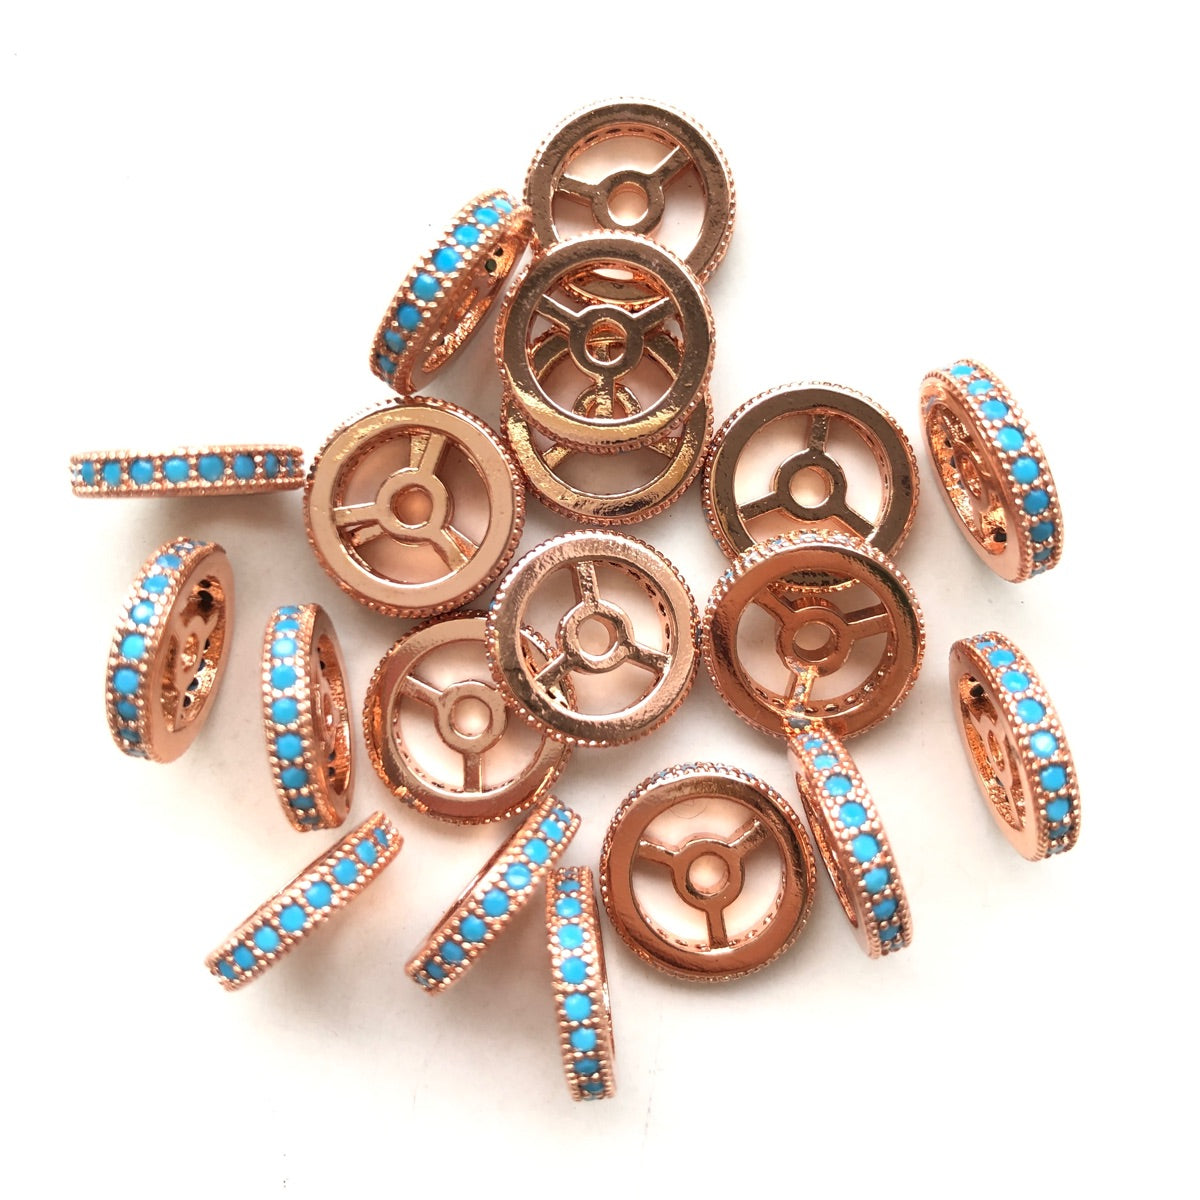 20pcs/lot 9.6/12mm Turquoise CZ Paved Wheel Rondelle Spacers Rose Gold CZ Paved Spacers New Spacers Arrivals Rondelle Beads Charms Beads Beyond